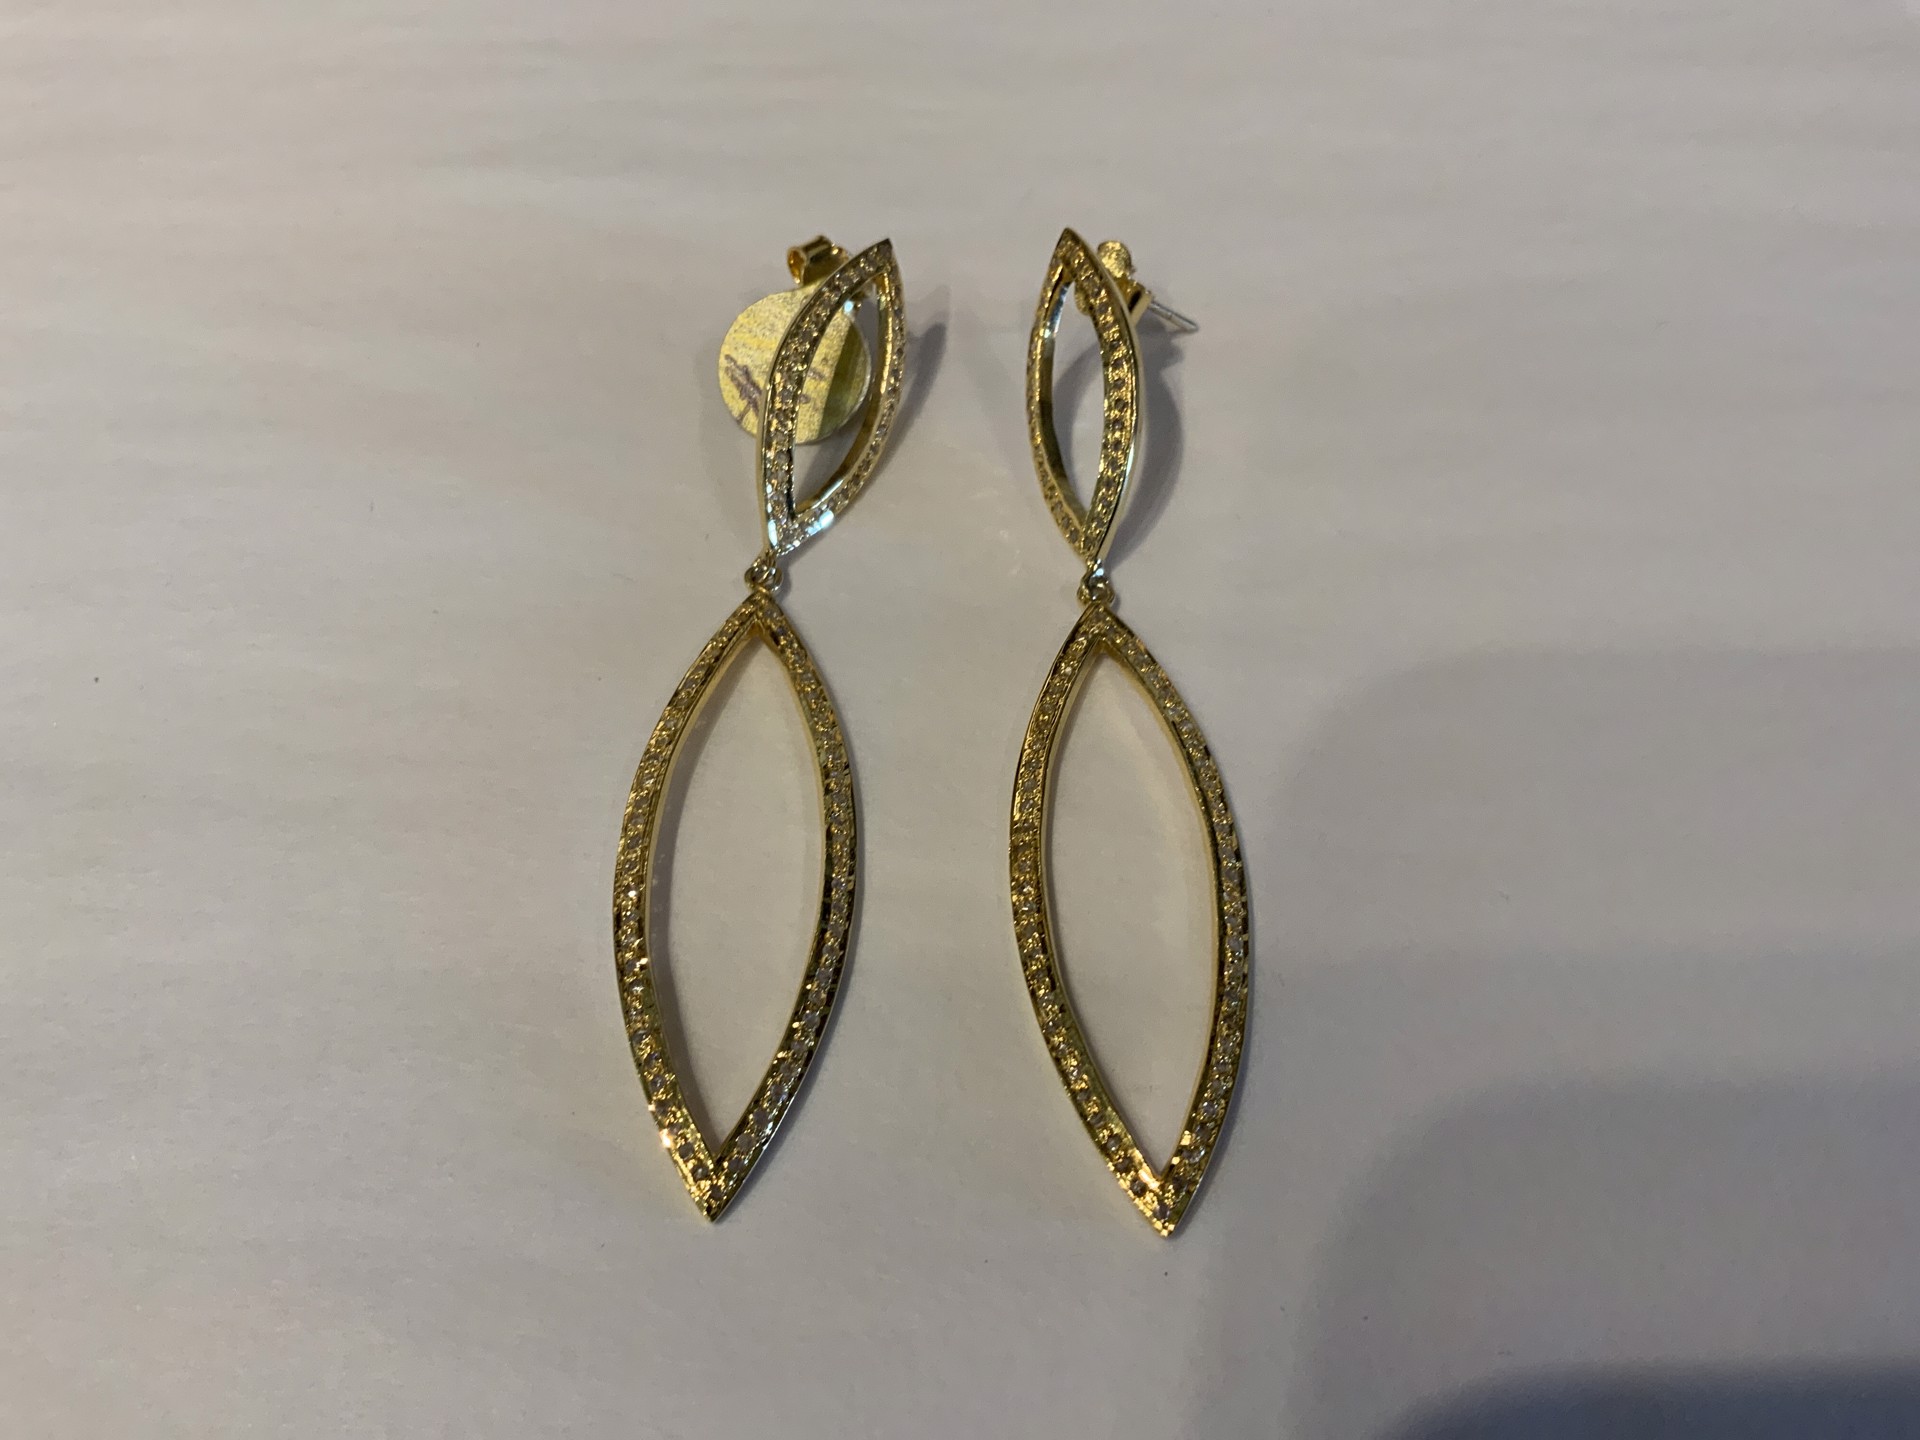 Gold Vermeil and Pave Diamond Post Earrings by Karen Birchmier